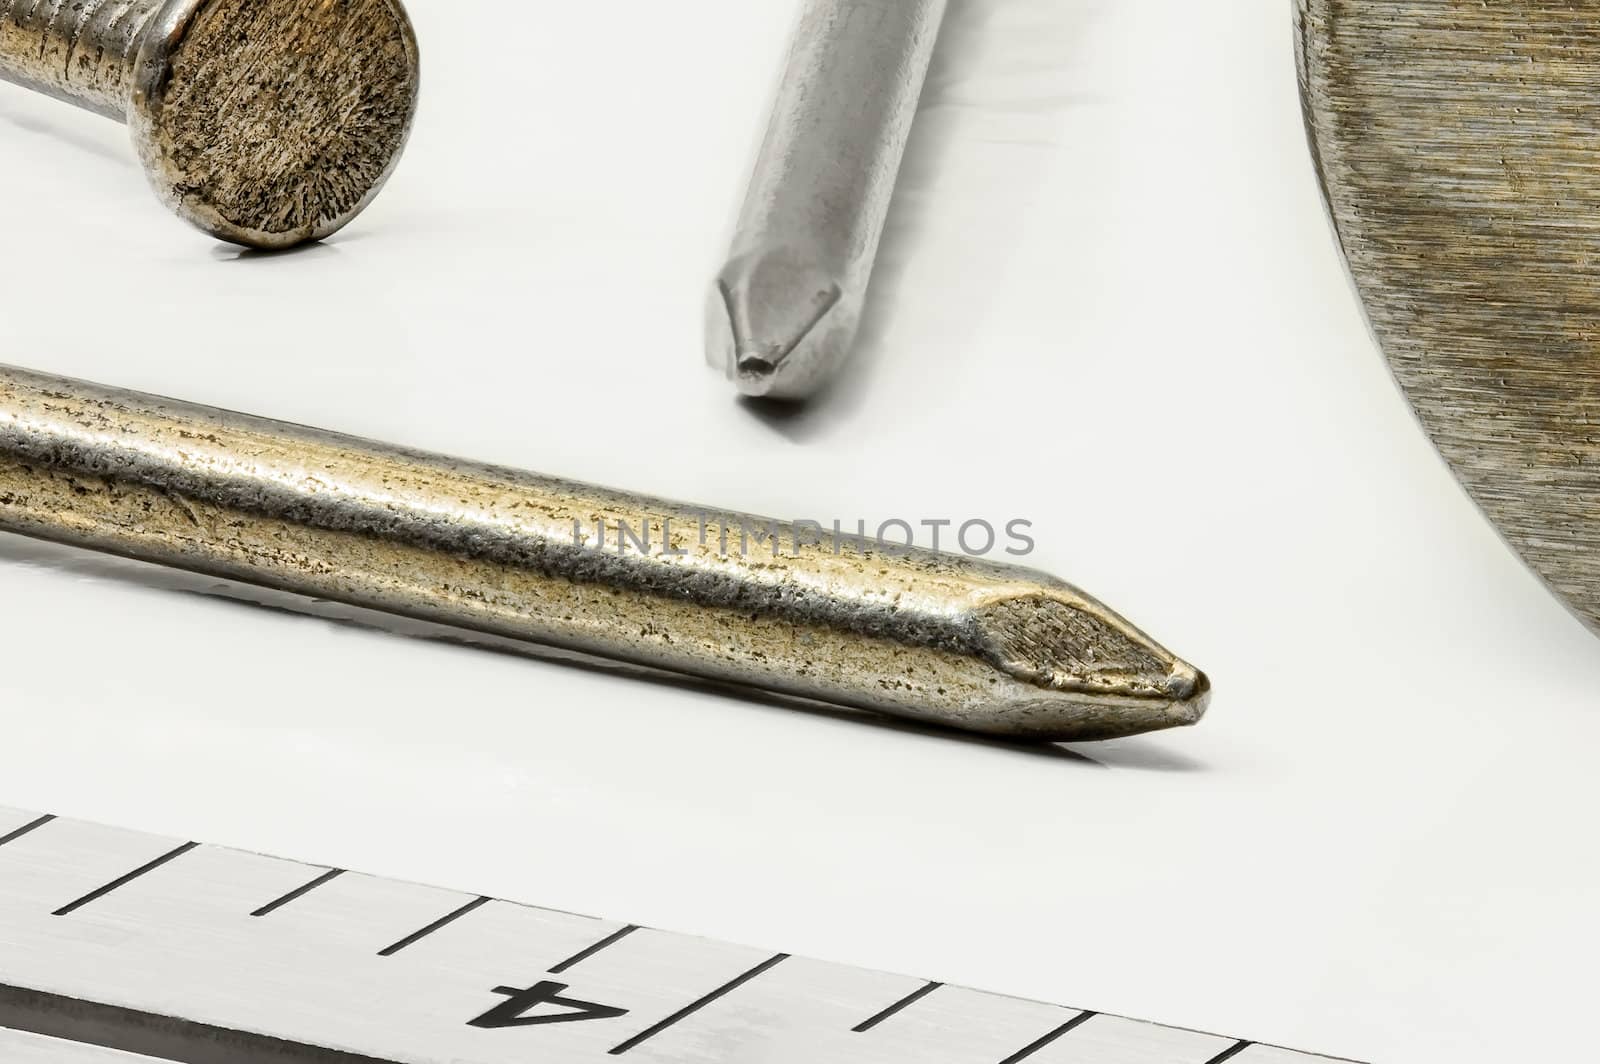 Nails Hammer and Ruler up Close by wolterk